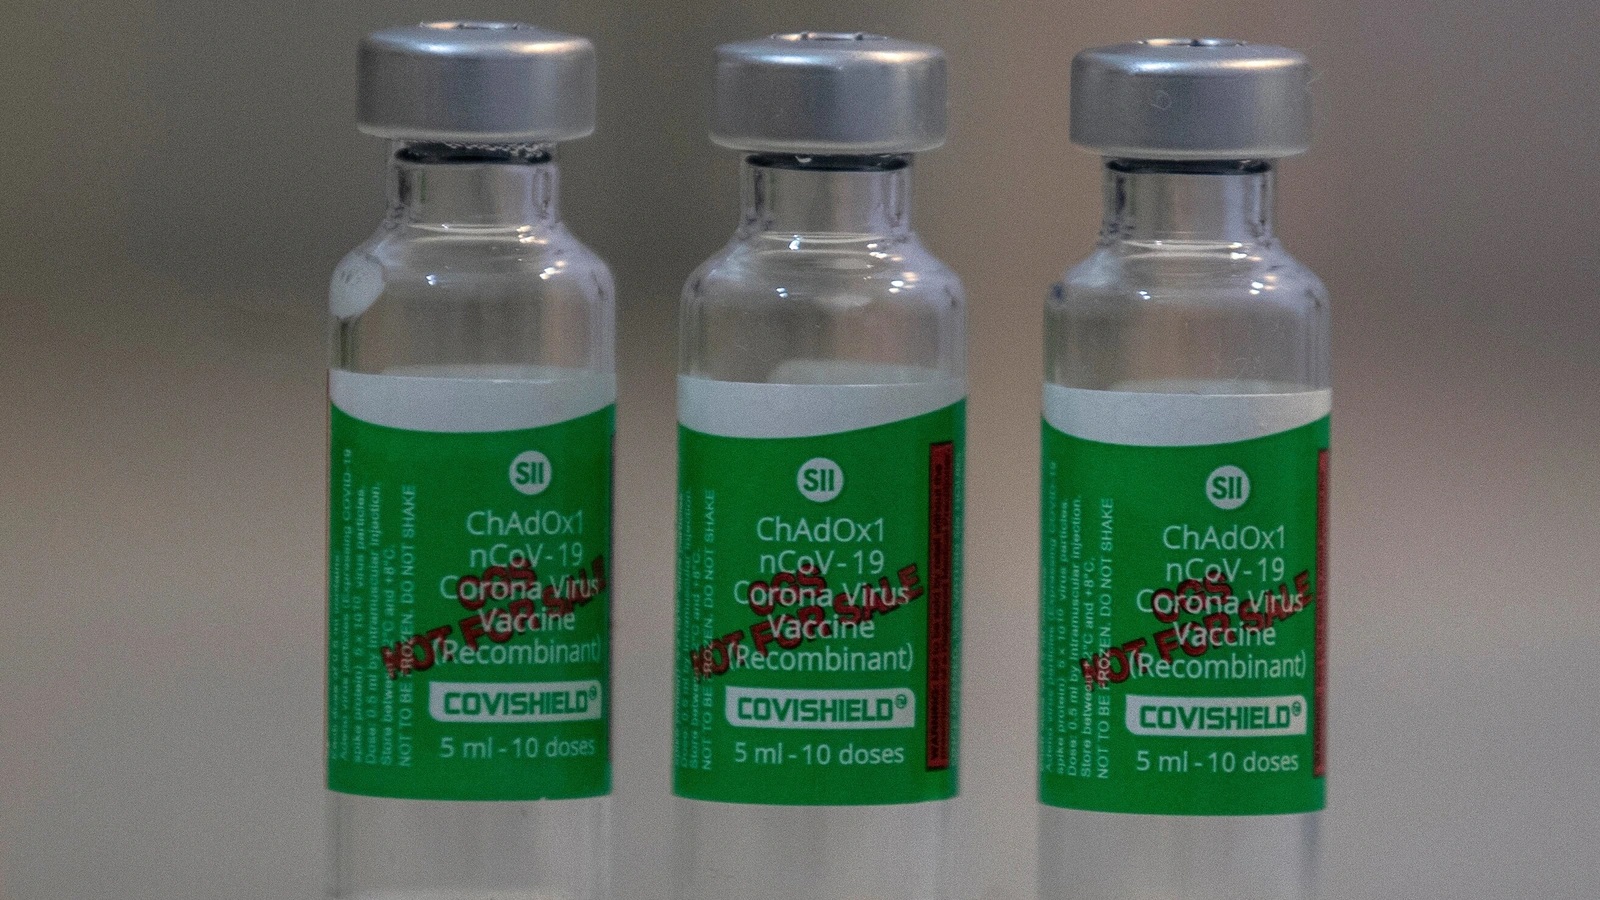 Covisheild, Covaxin price likely to be capped at Rs 275 per dose